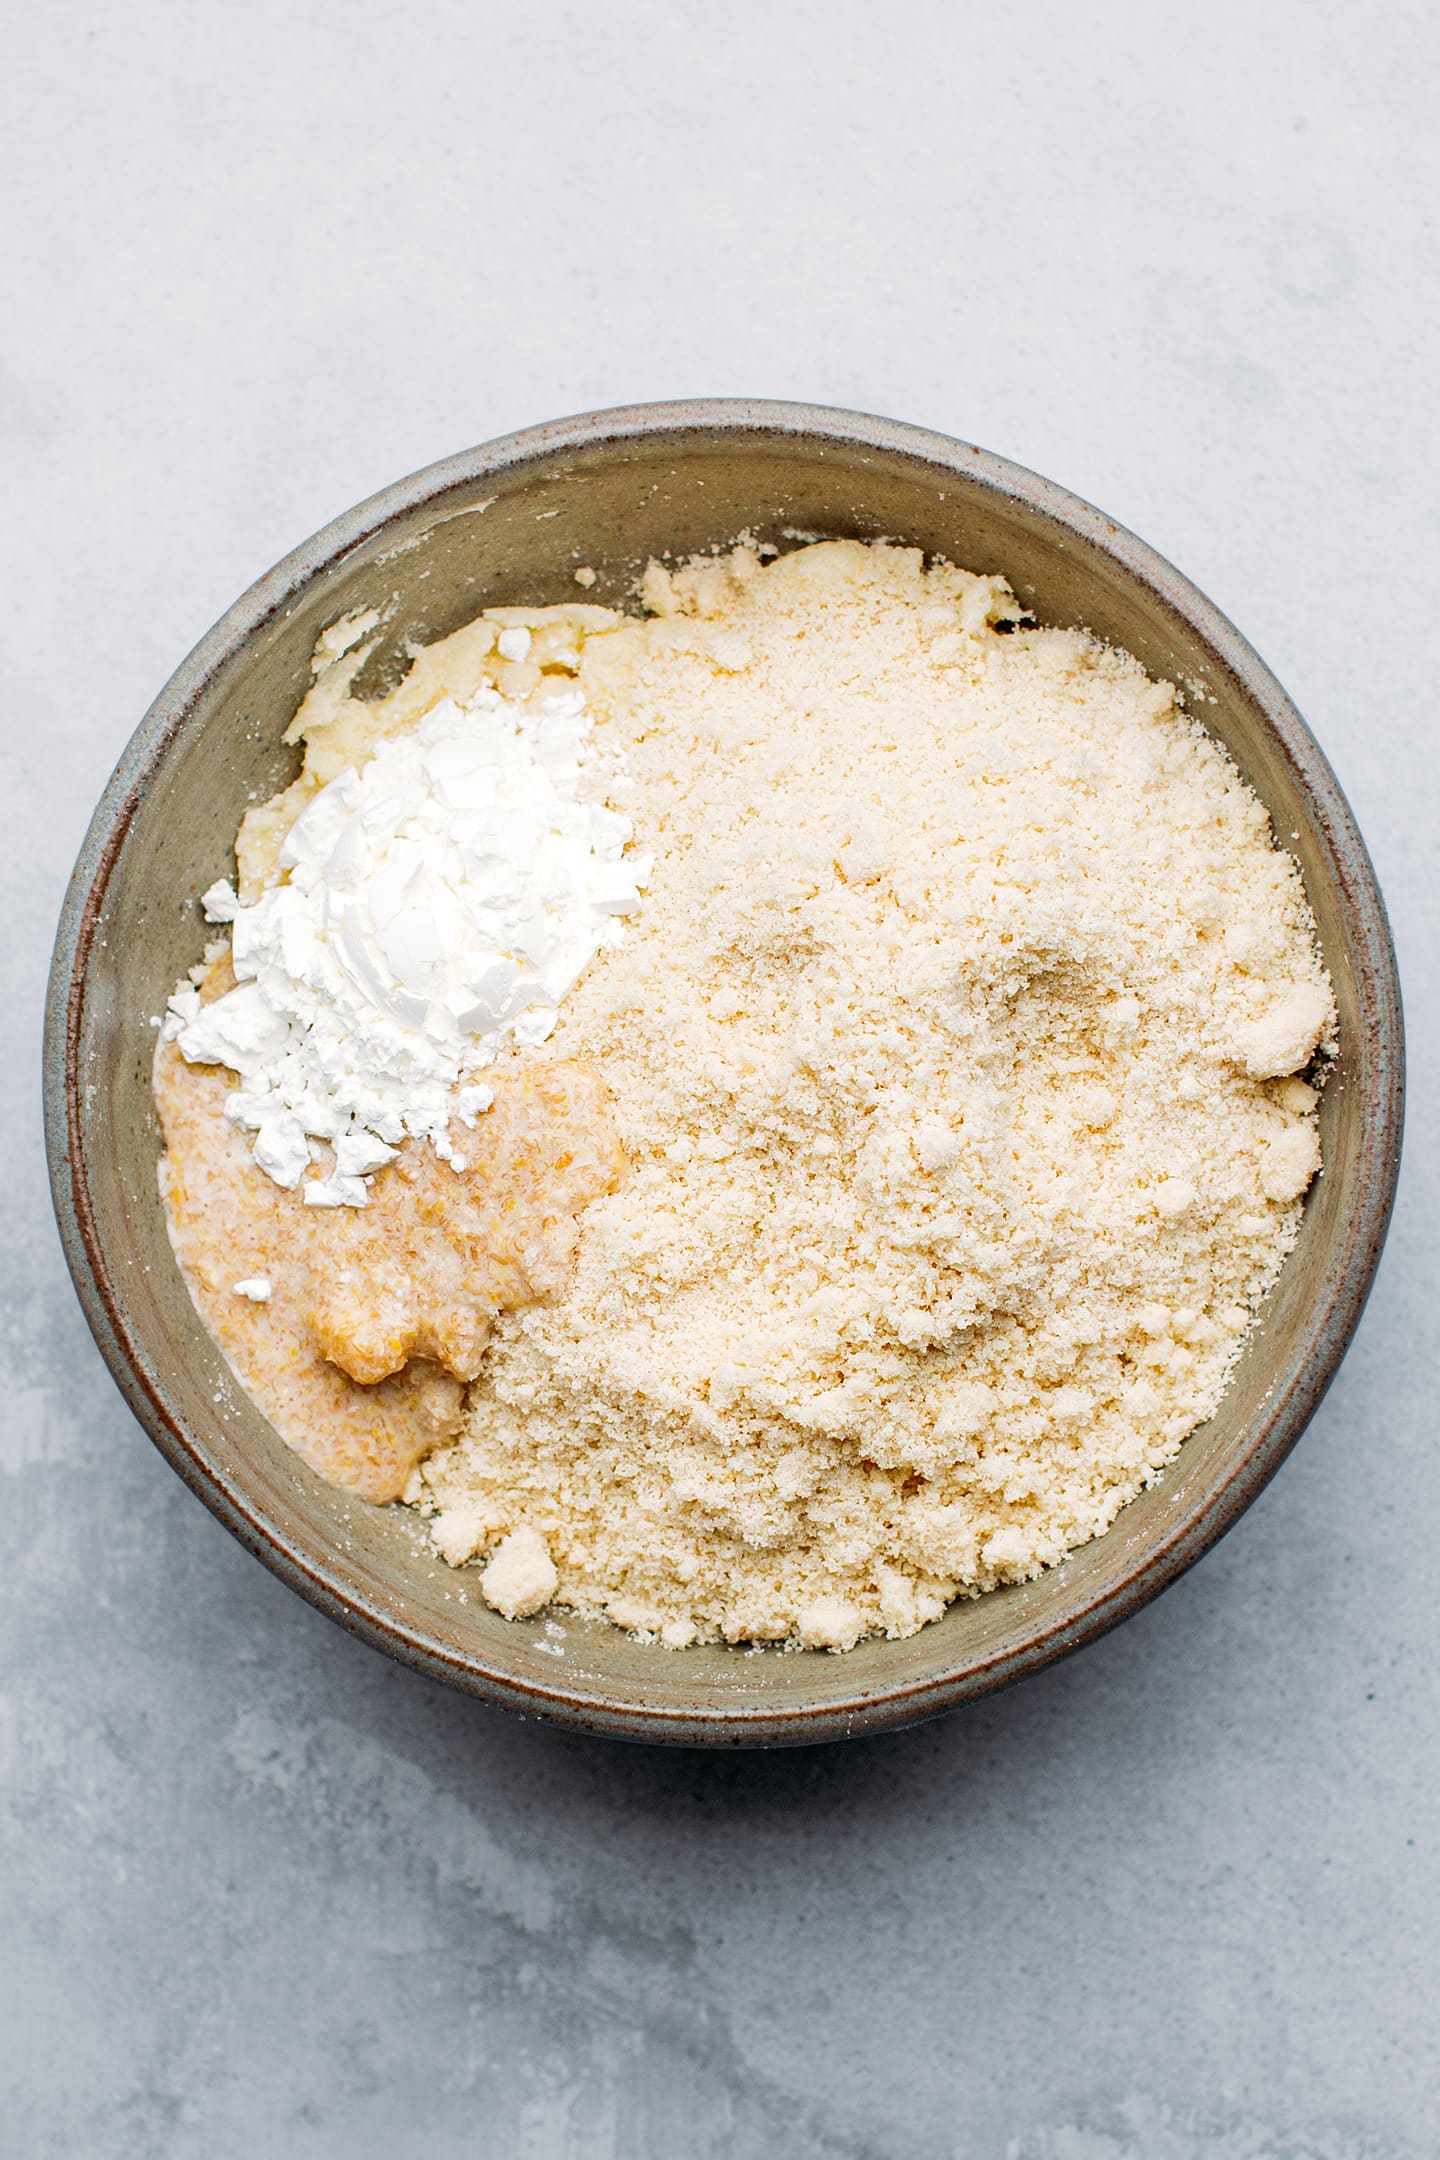 Almond flour, cornstarch, and flax egg in a mixing bowl.